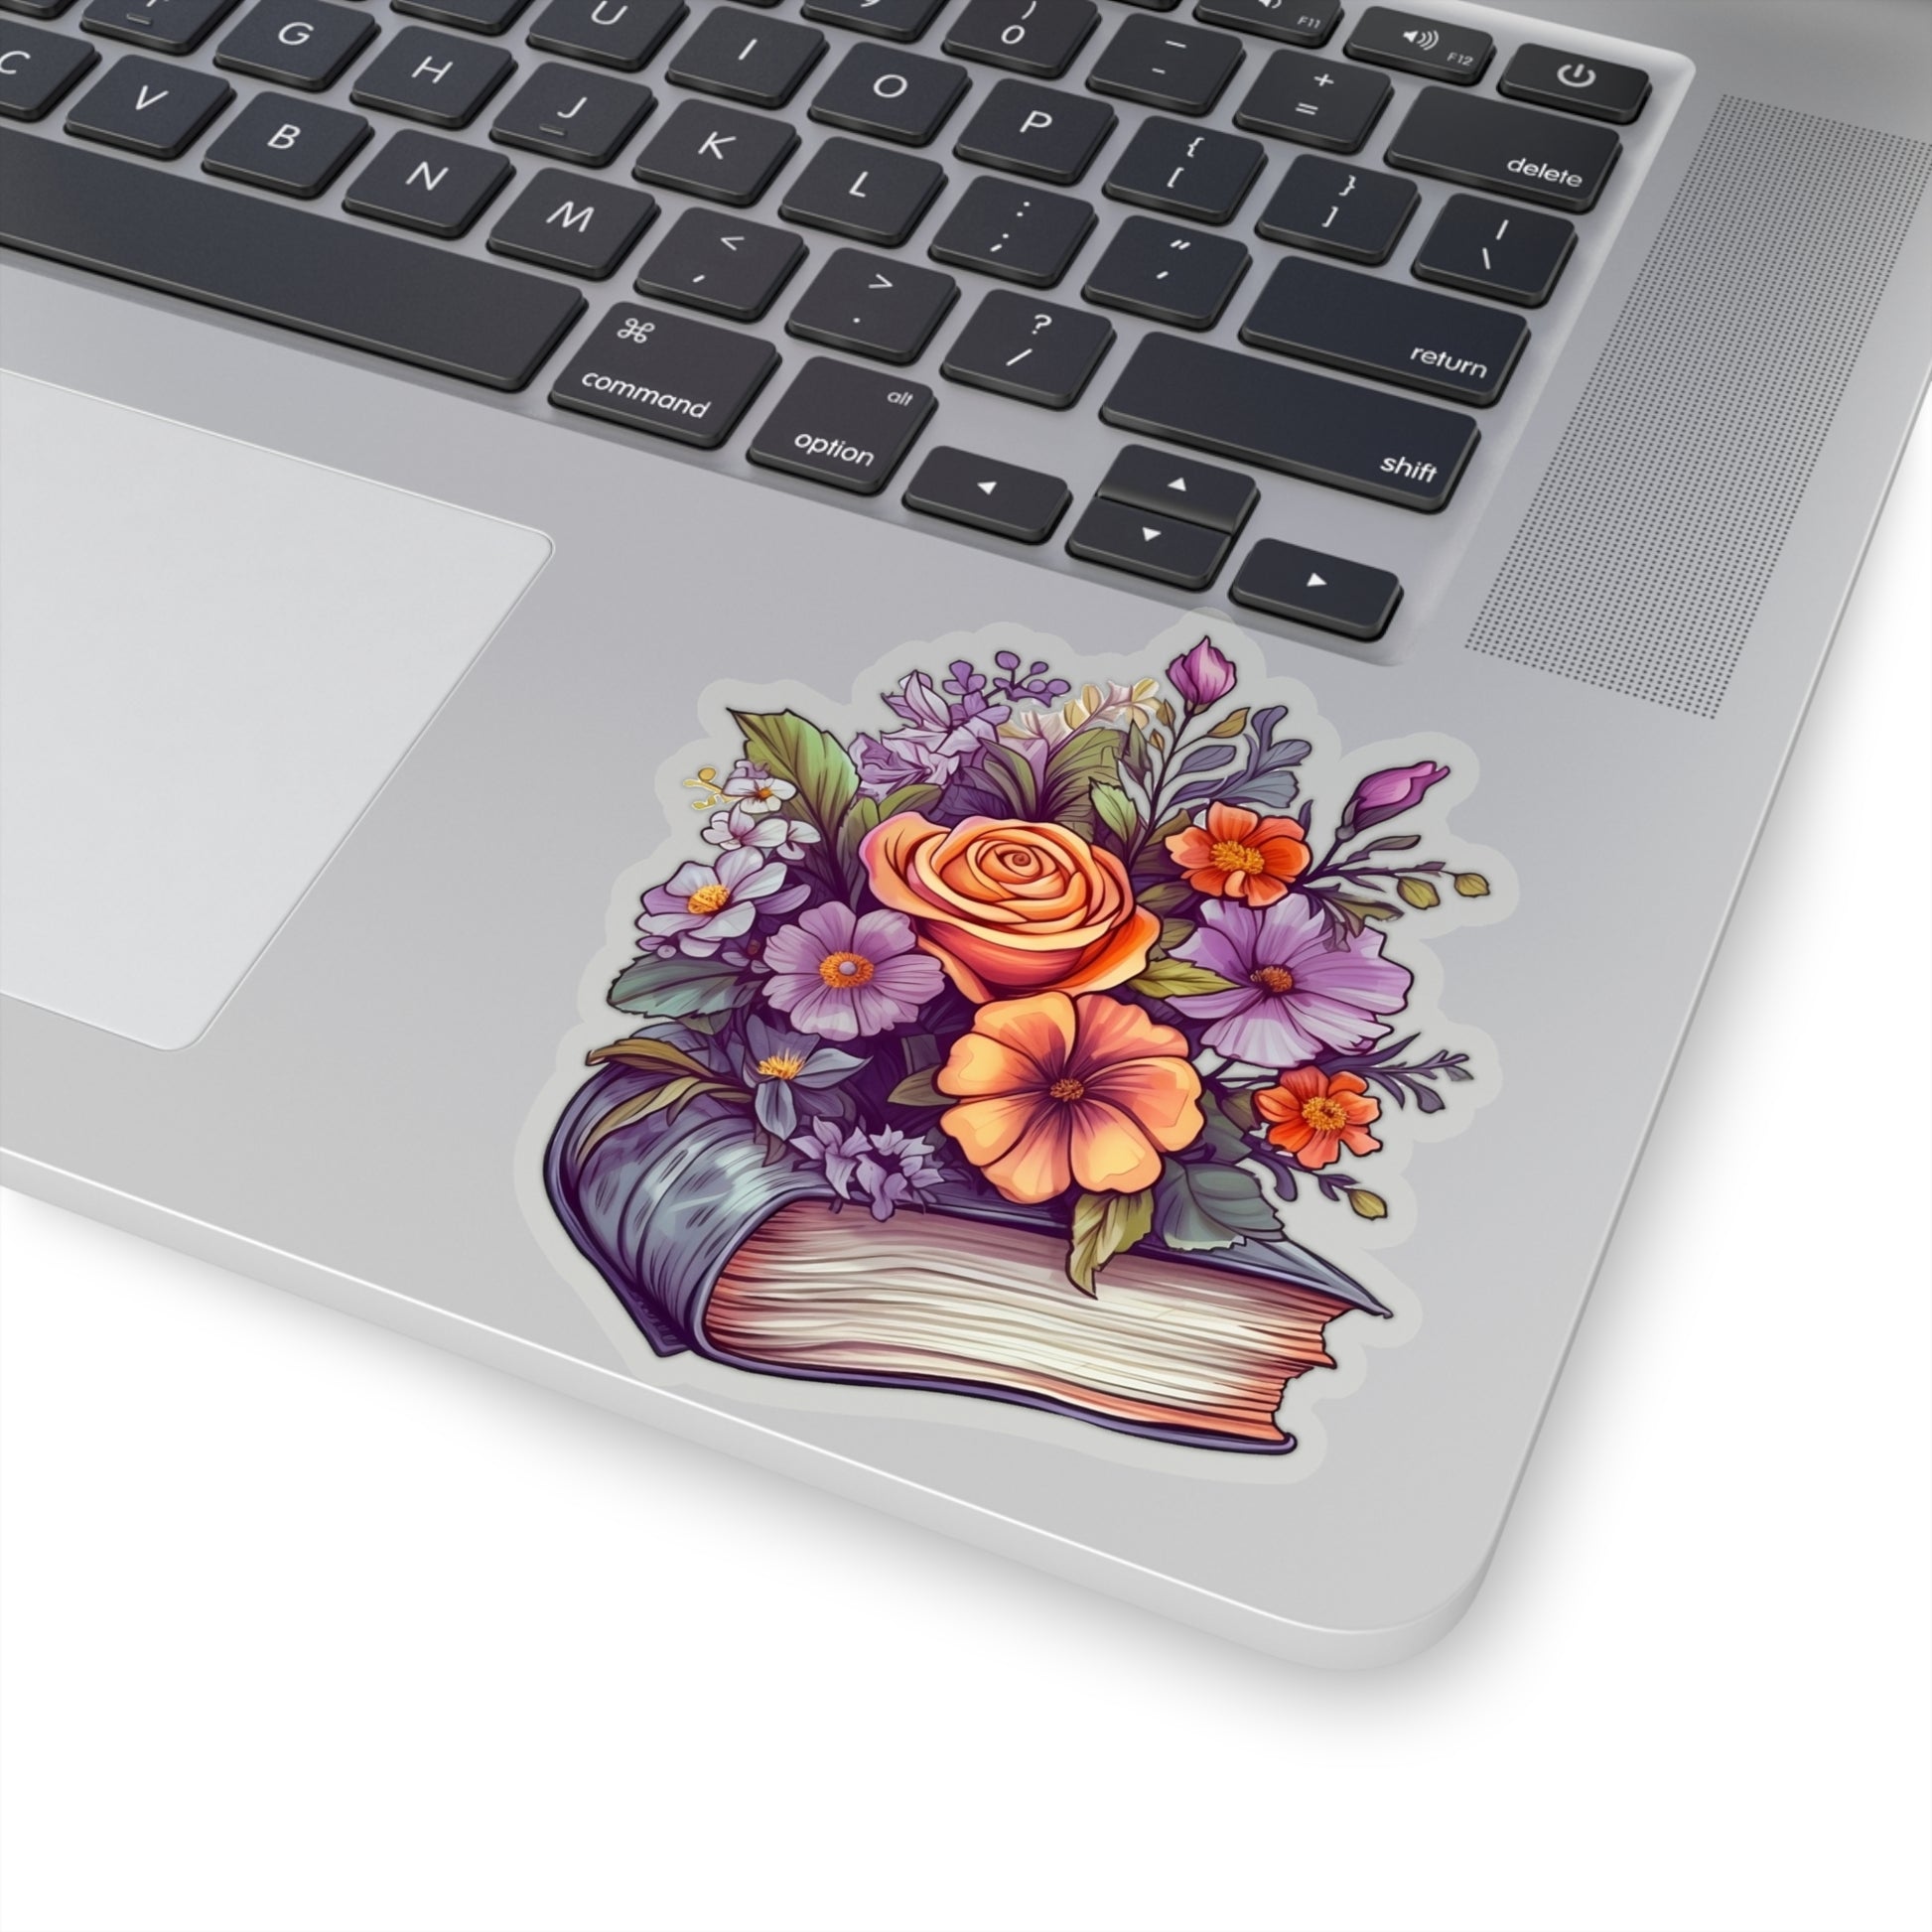 Book with Flowers Sticker, Library Reading Art Laptop Decal Vinyl Cute Waterbottle Tumbler Car Waterproof Bumper Die Cut Wall Clear Starcove Fashion